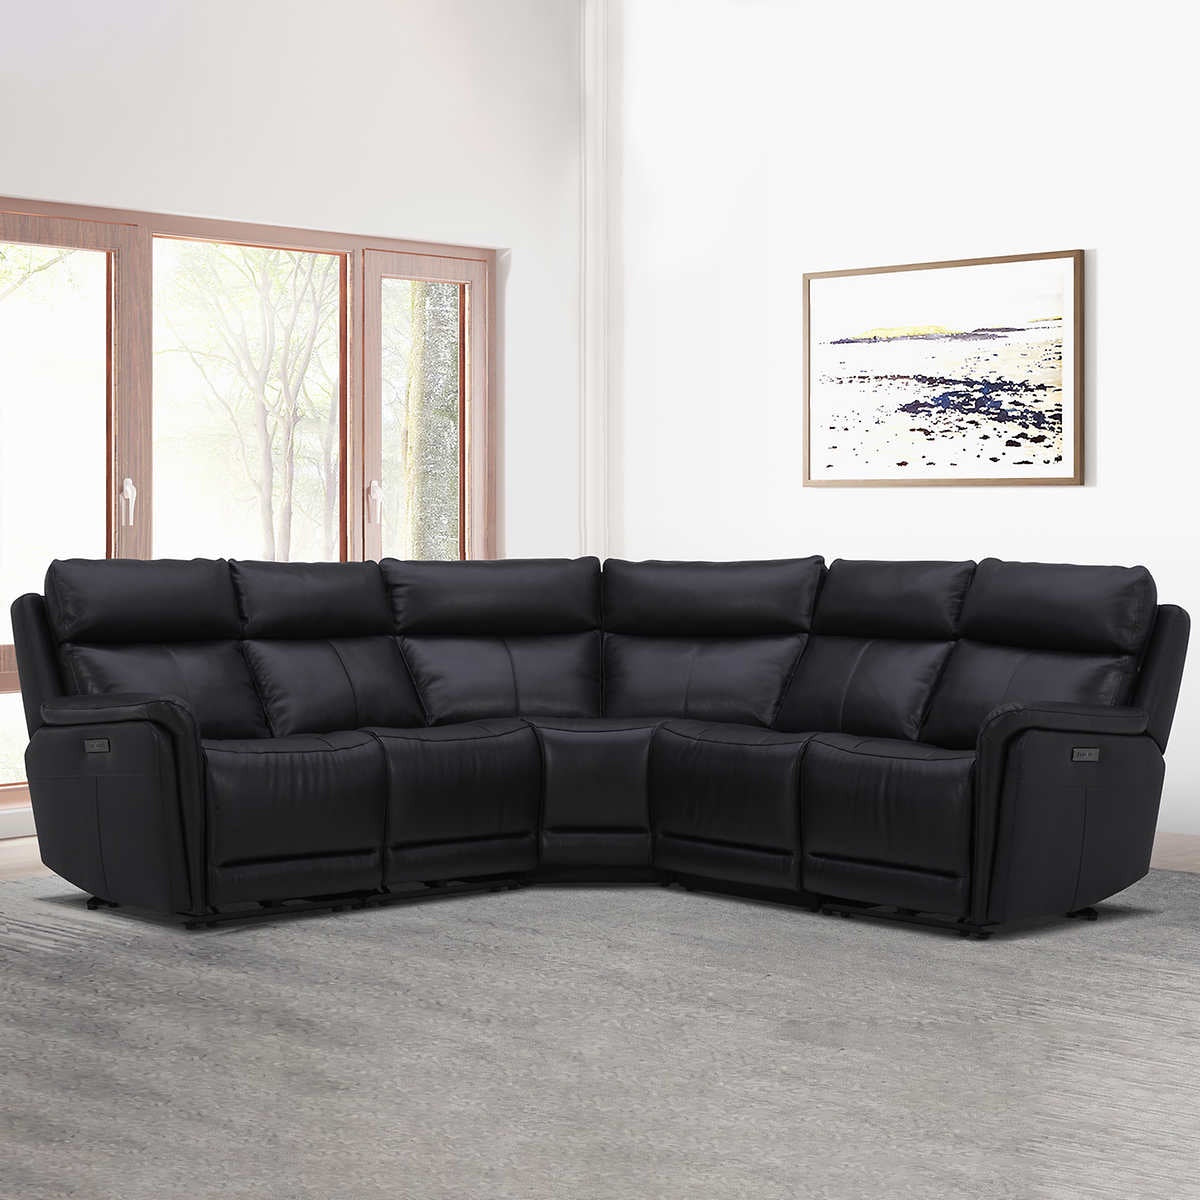 Gilman Creek 5-piece Top Grain Leather Power Reclining Sectional